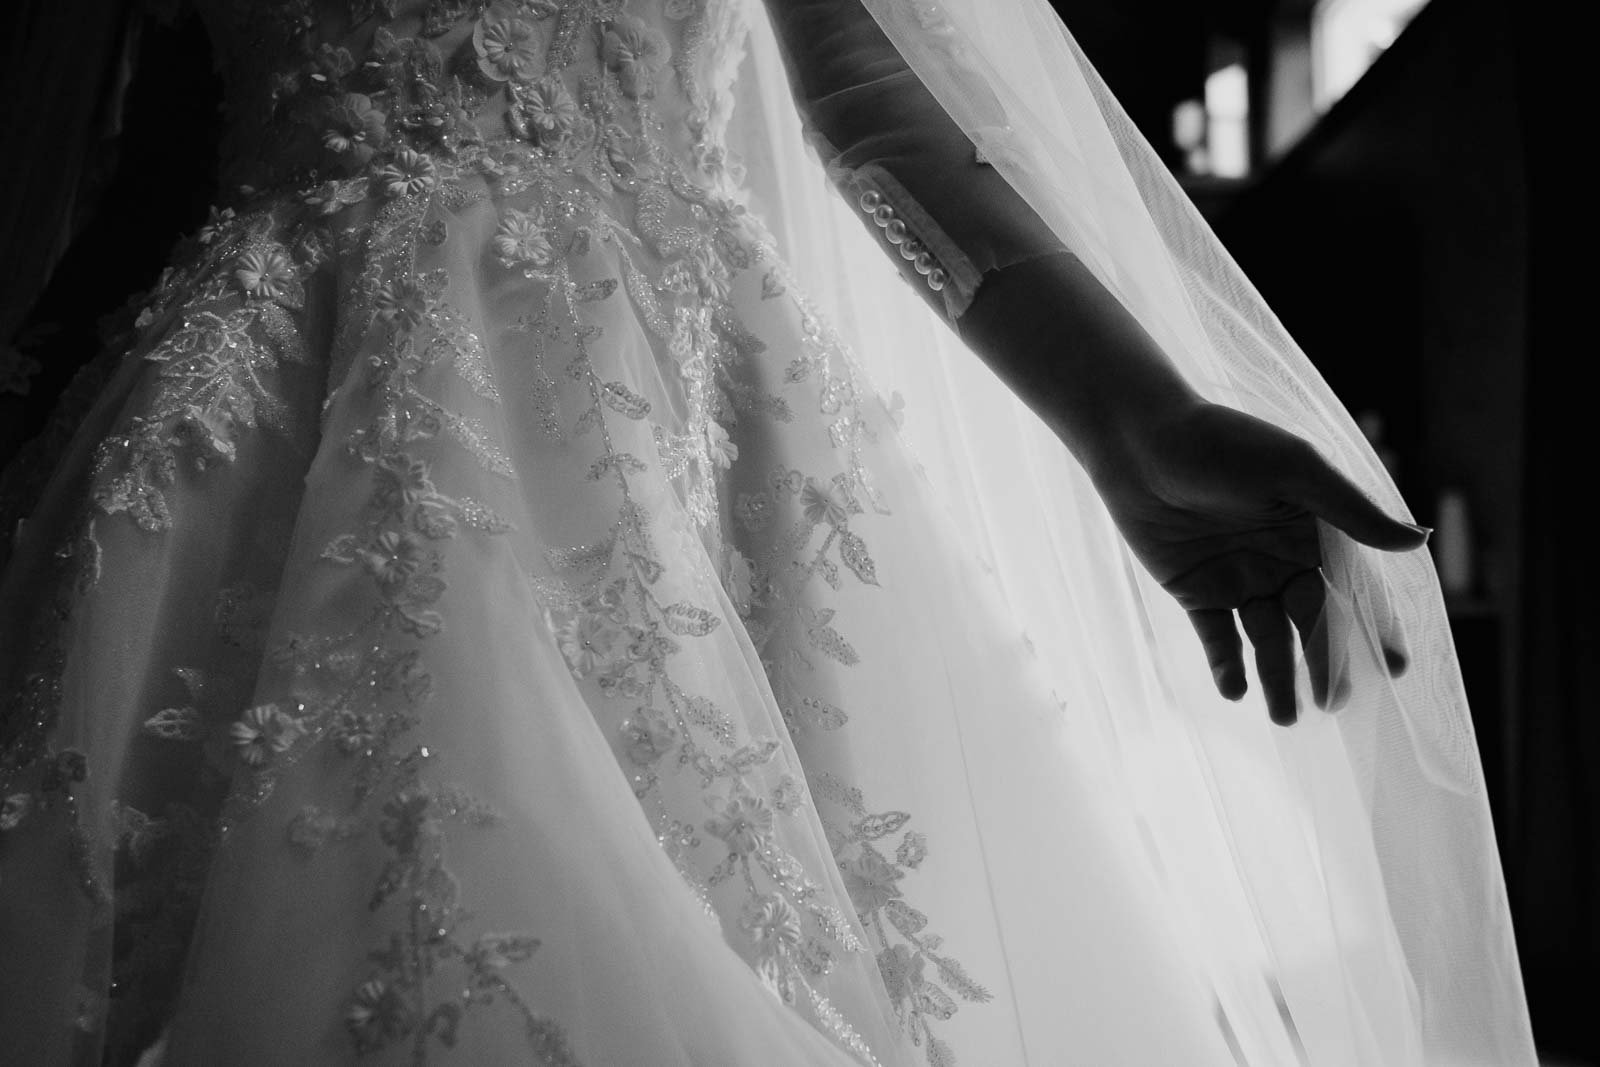 Hand of the brand of the bride silhouettes against her dress